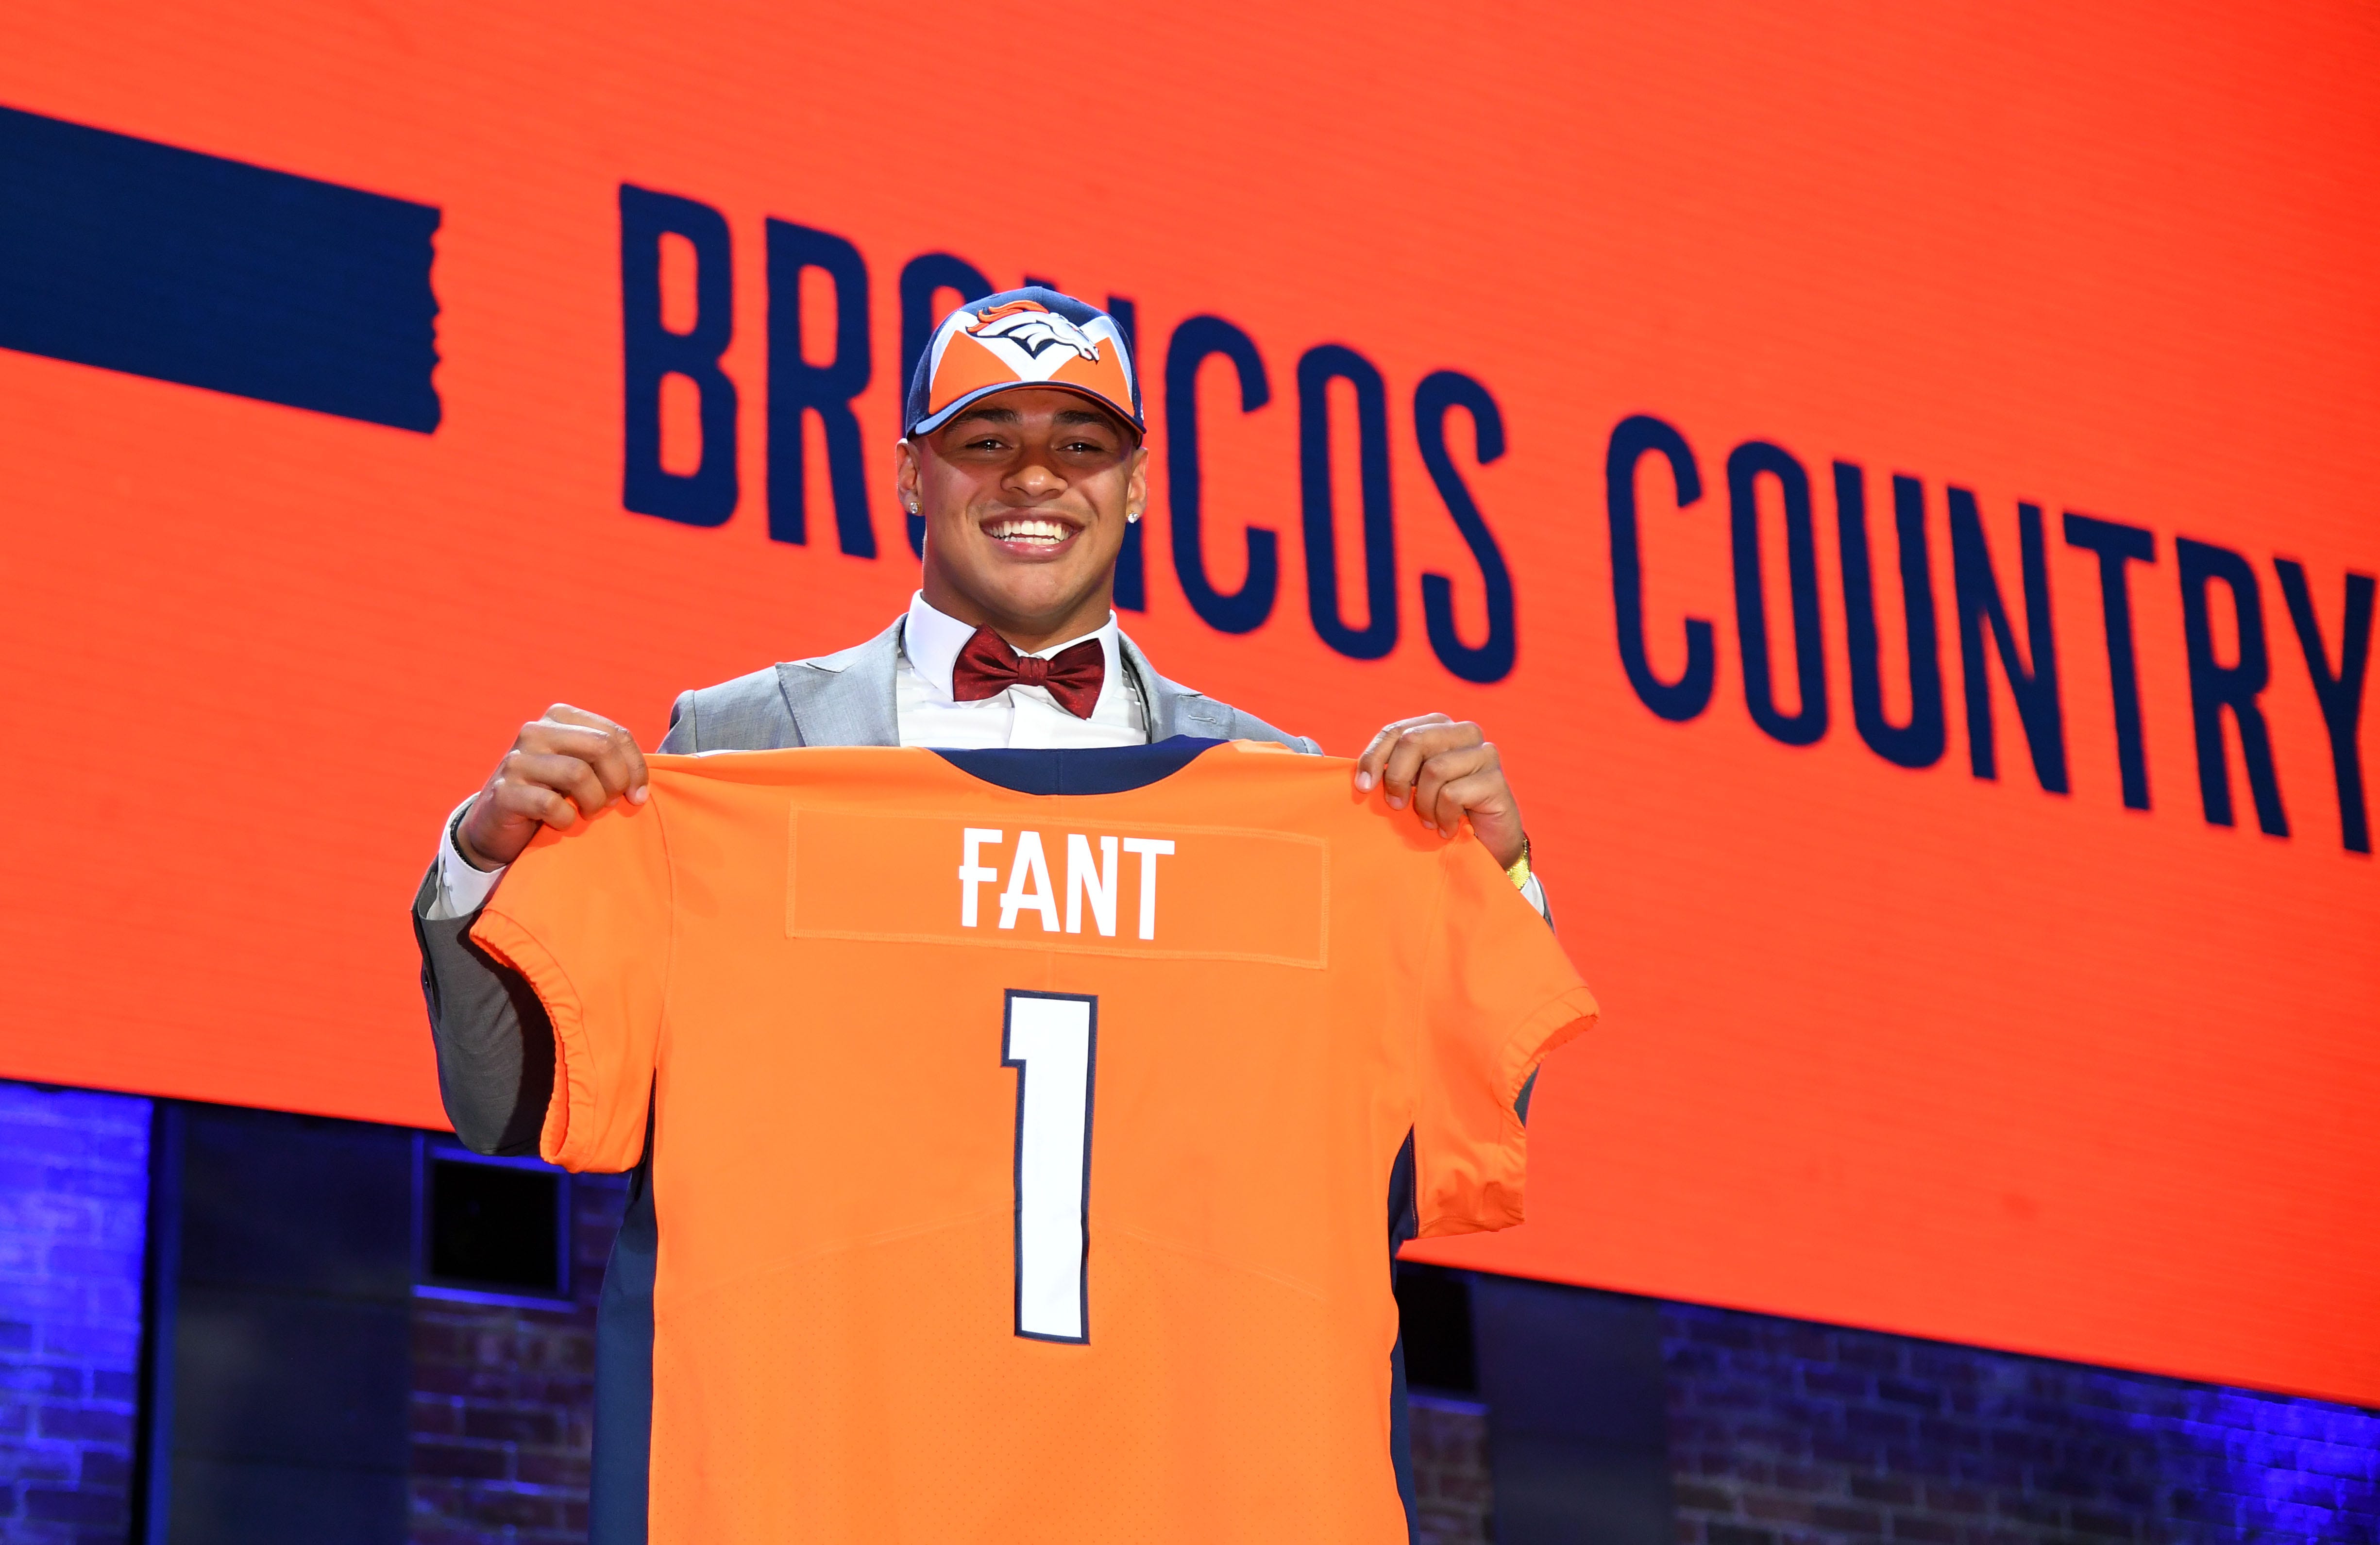 Apr 25, 2019; Nashville, TN, USA; Noah Fant (Iowa) is selected as the number twenty overall pick to the Denver Broncos in the first round of the 2019 NFL Draft in Downtown Nashville.